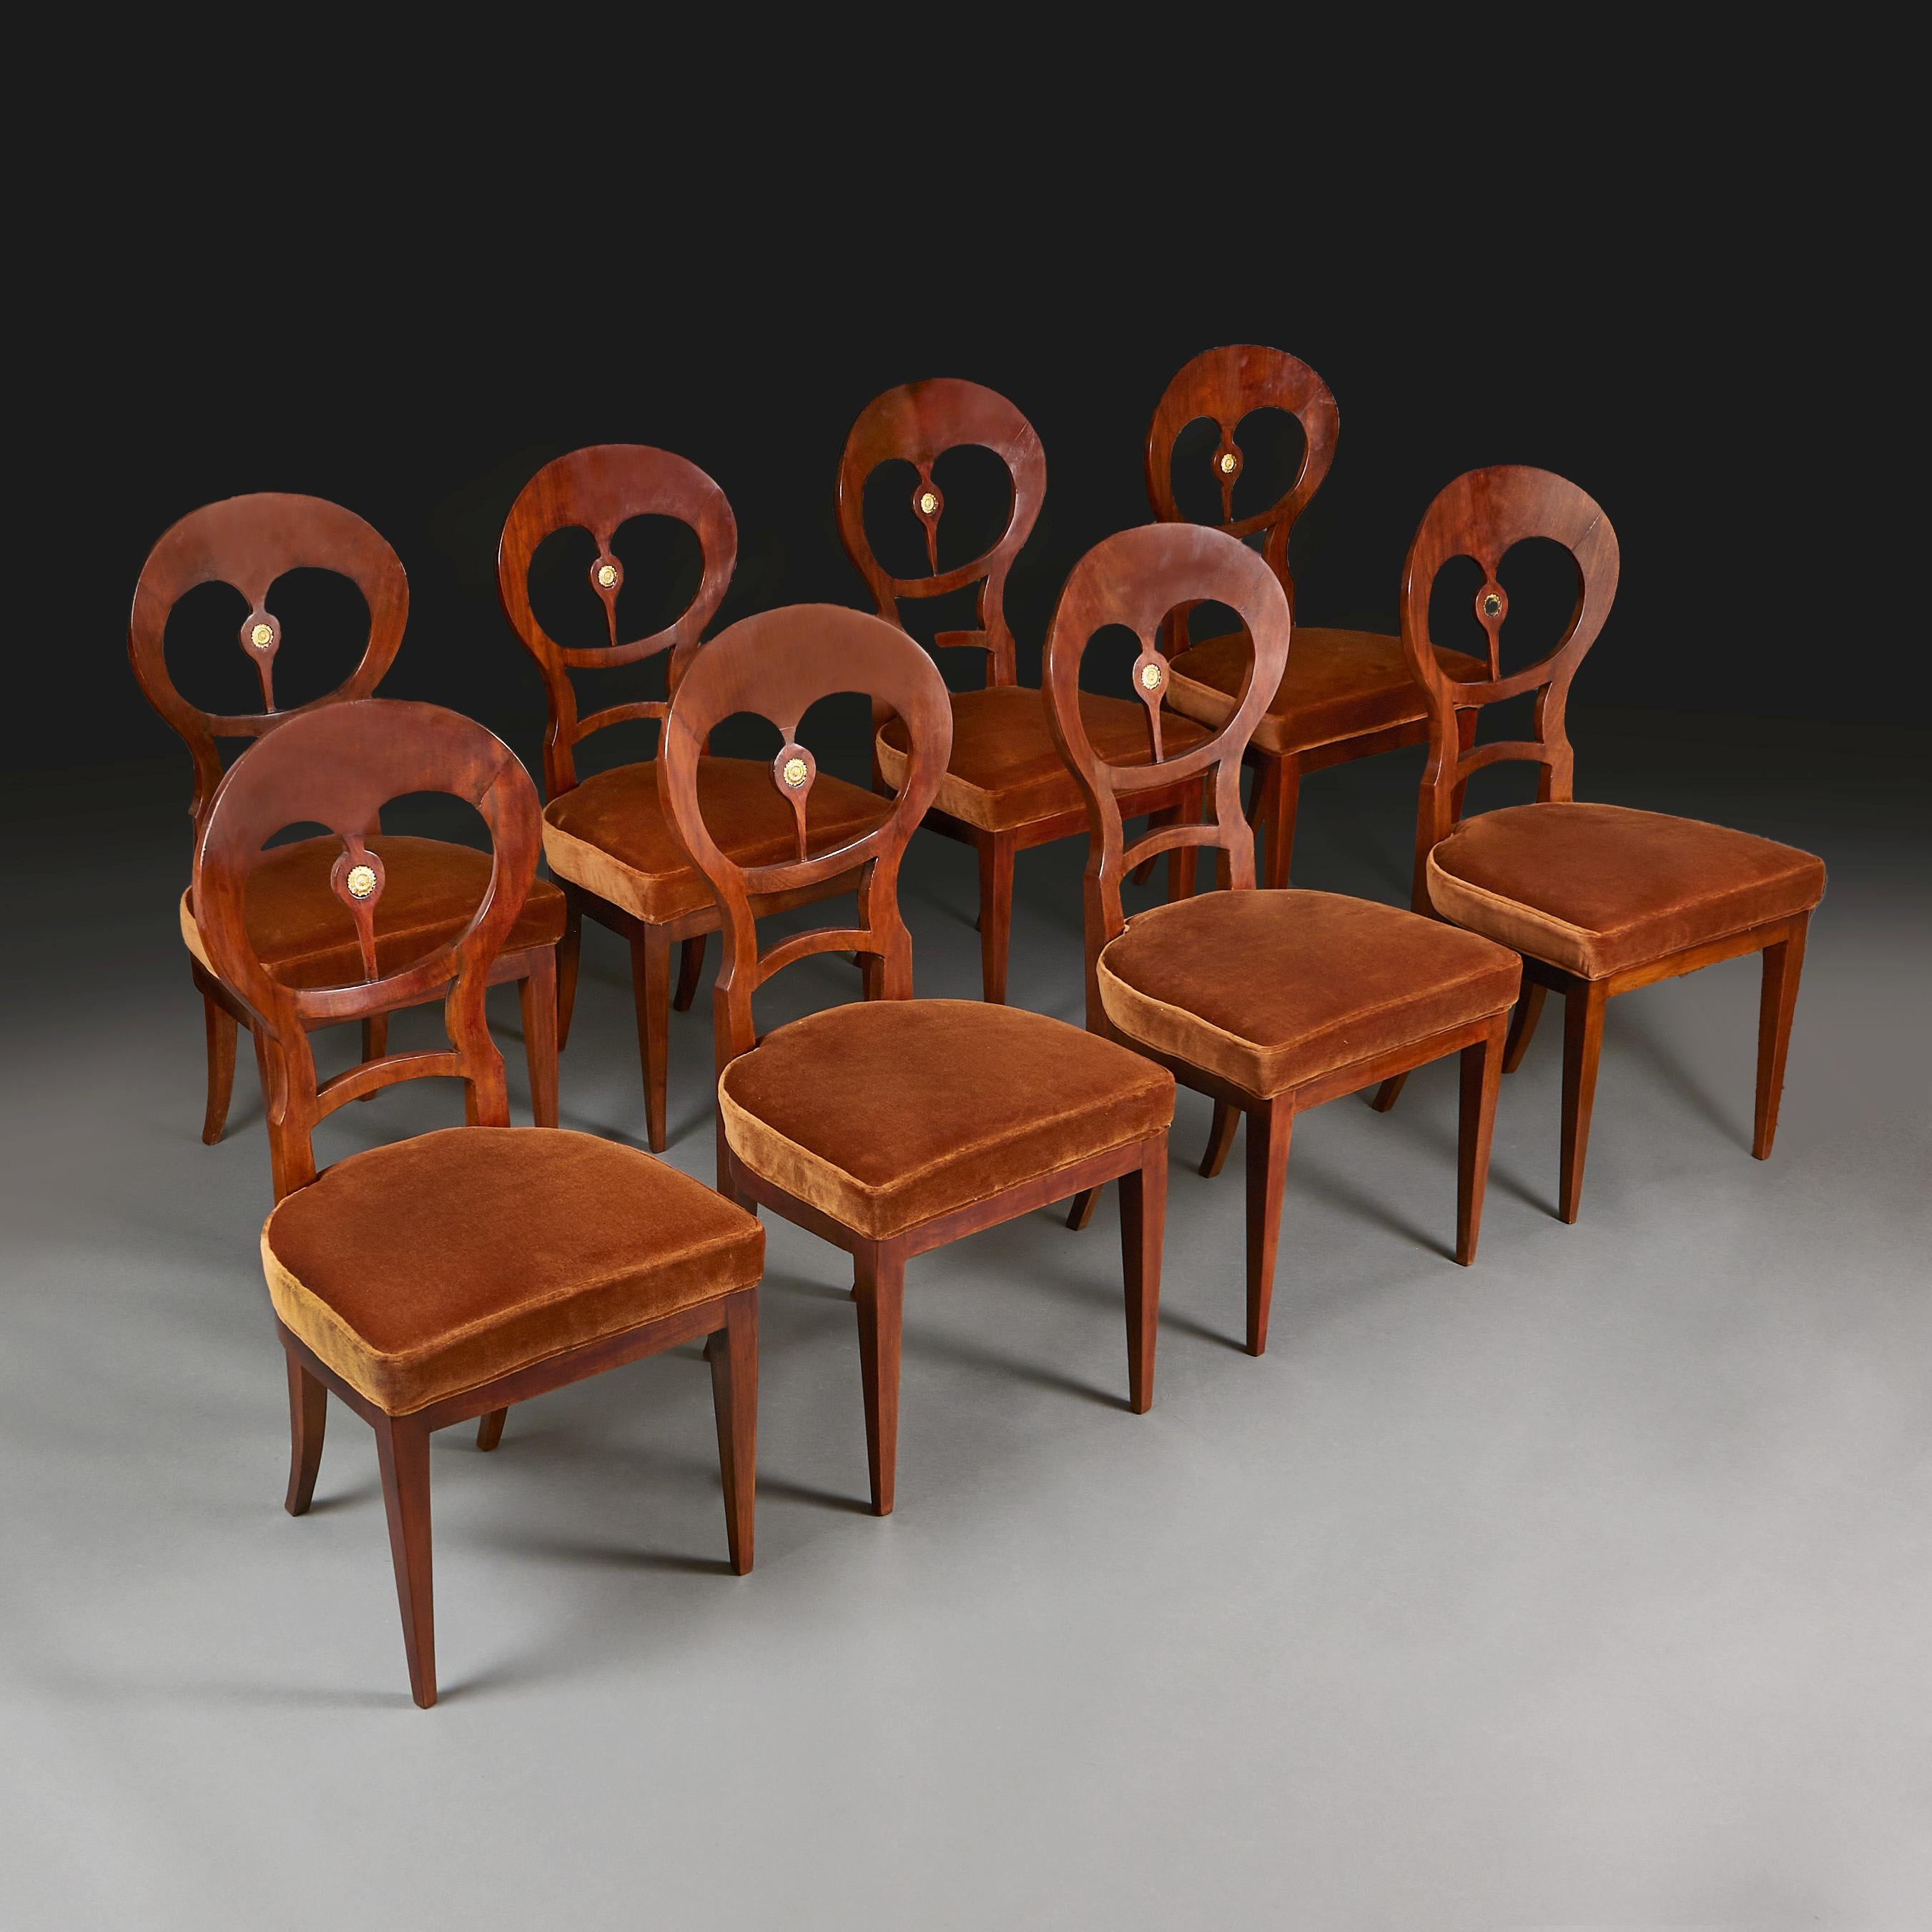 Austria, circa 1820

A fine set of eight Biedermeier walnut dining chairs, with rounded and pierced backsplats, embellished to the centre with an ormolu sunflower paterae. The seats upholstered in brown velvet. 

Measures: Height 98.00cm
Width